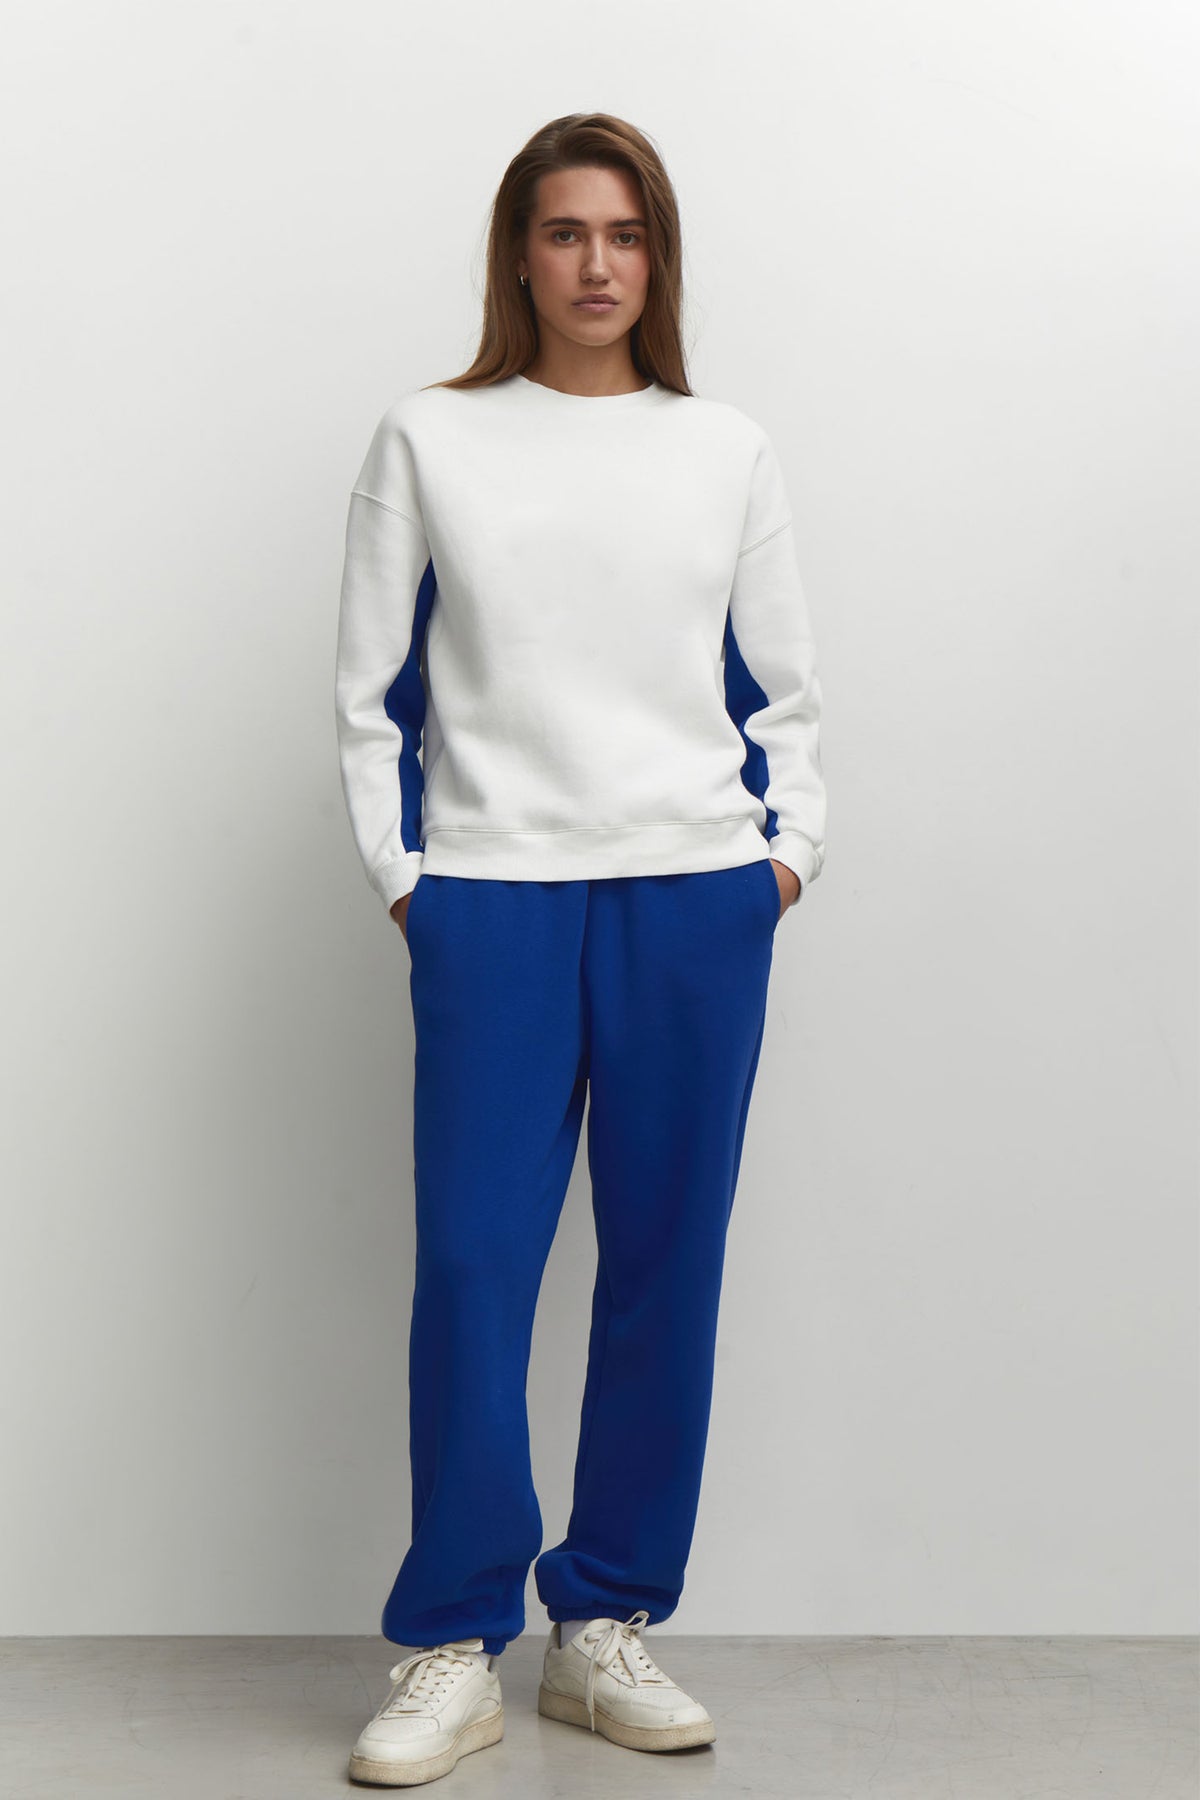 Straight-Cut Pants in Royal Blue - Lahori Athleisure